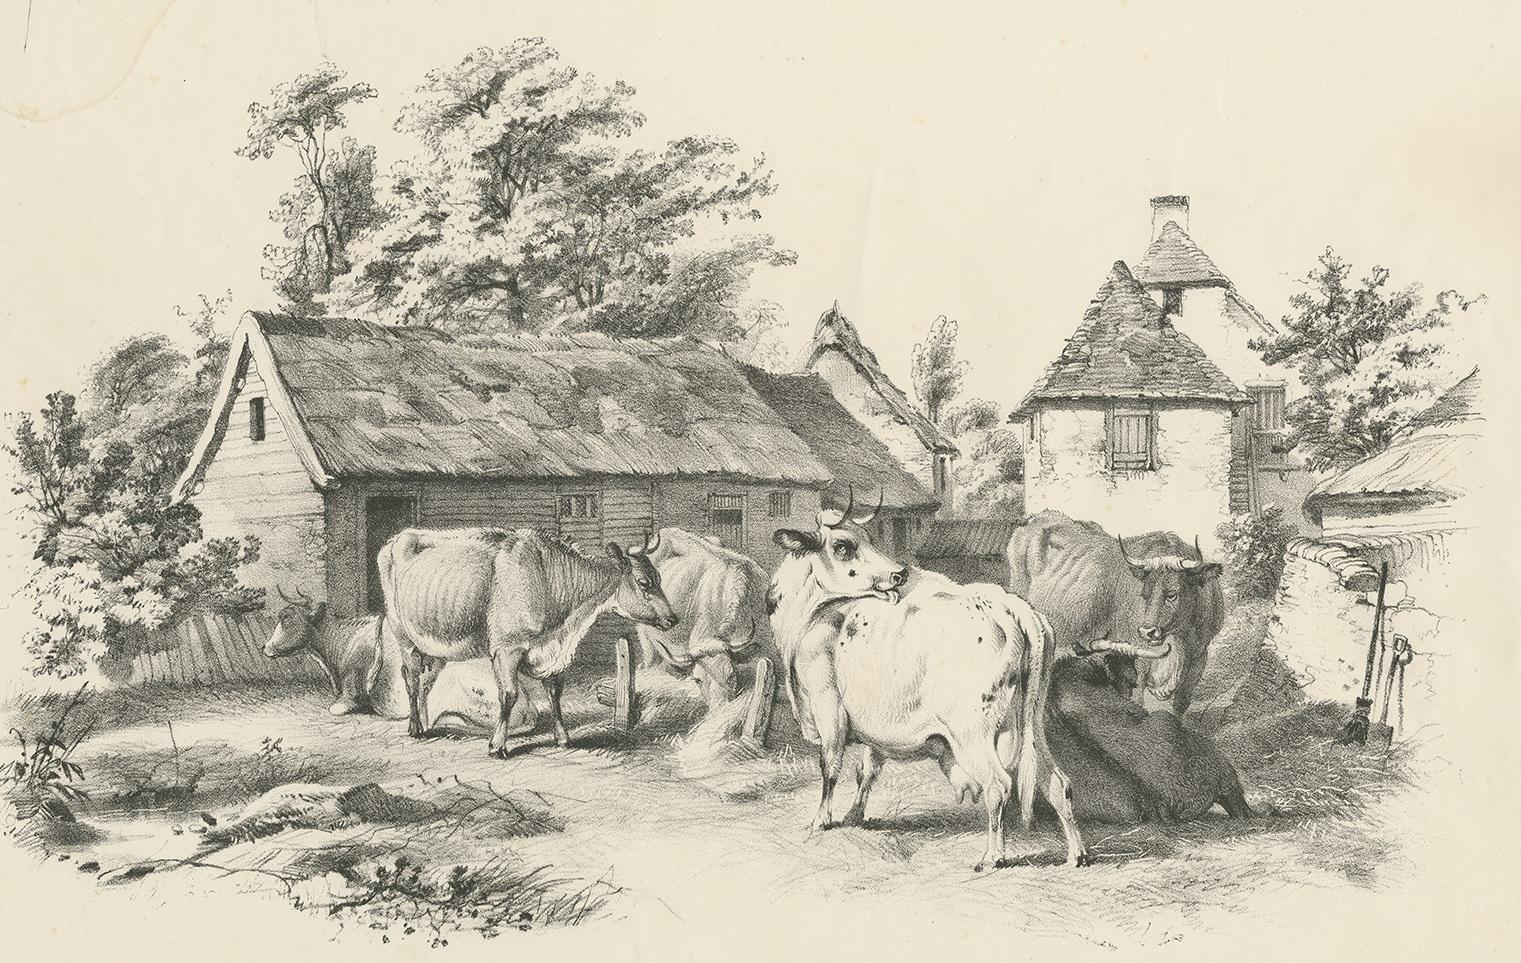 Antique print of various cows.This print originates from 'Cattle Subjects' by Thomas Sidney Cooper. He was an English landscape painter noted for his images of cattle and farm animals.